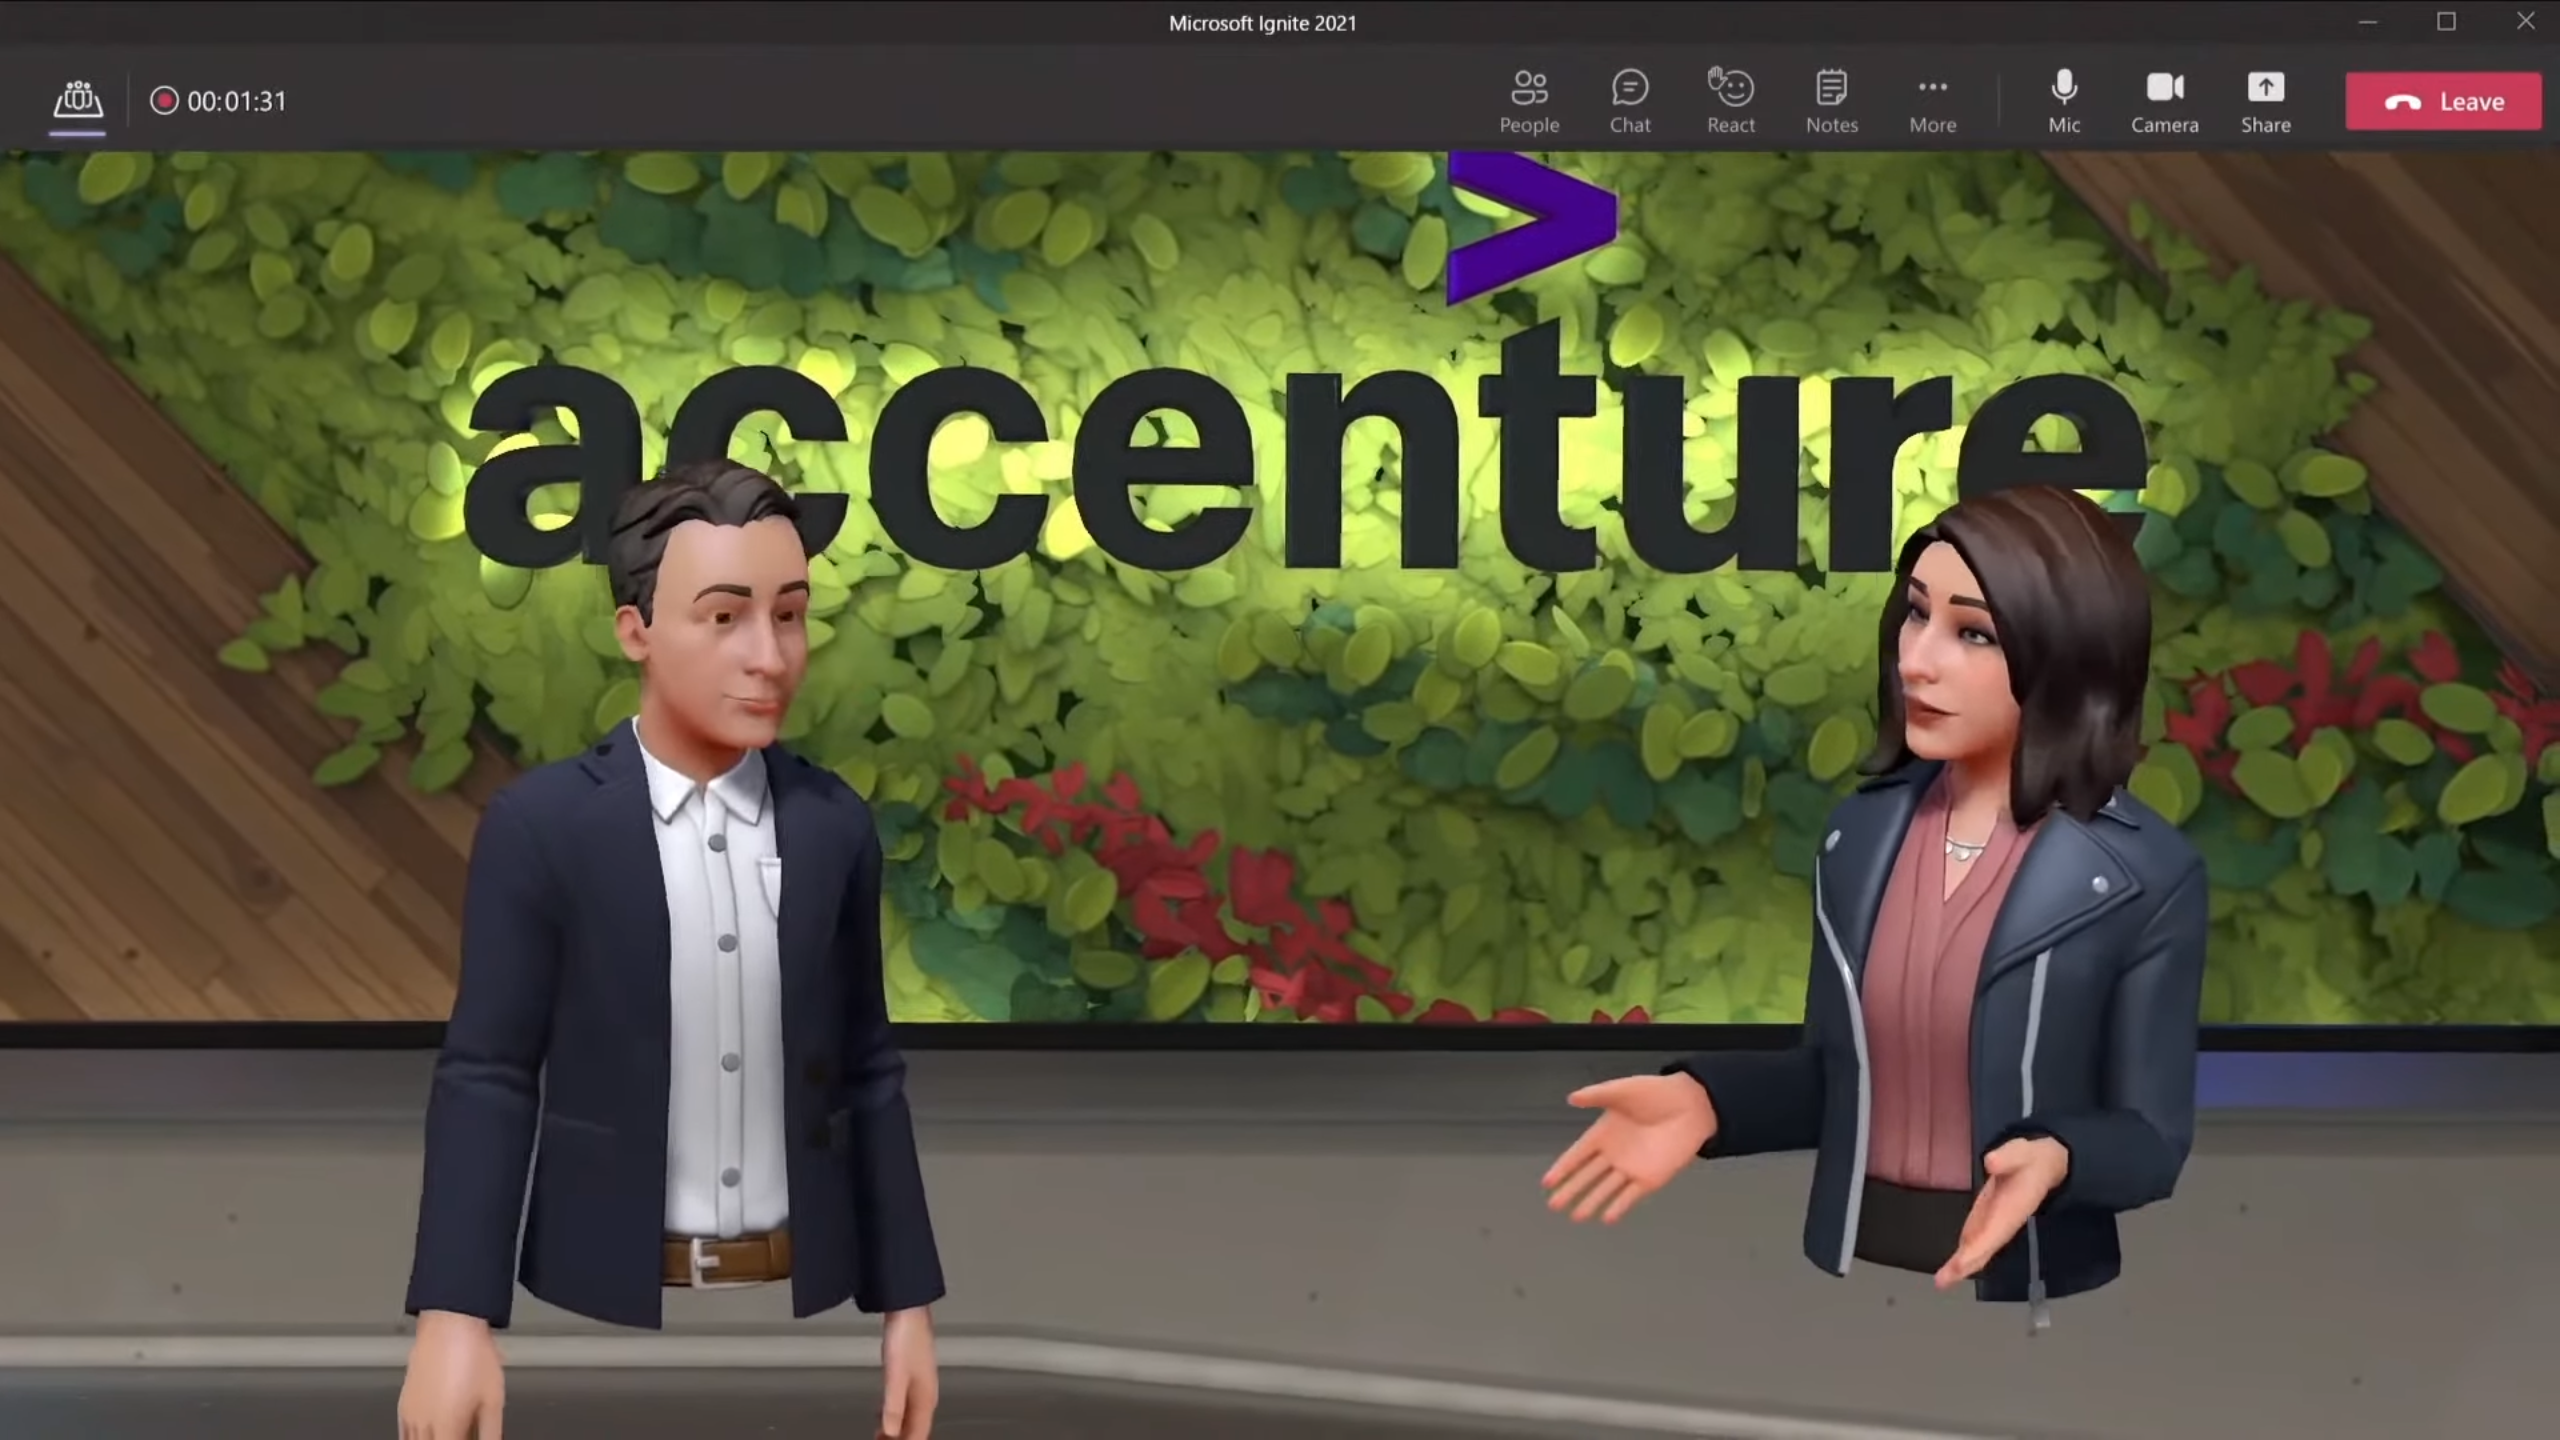 Accenture's metaverse experiment powered by Microsoft Mesh